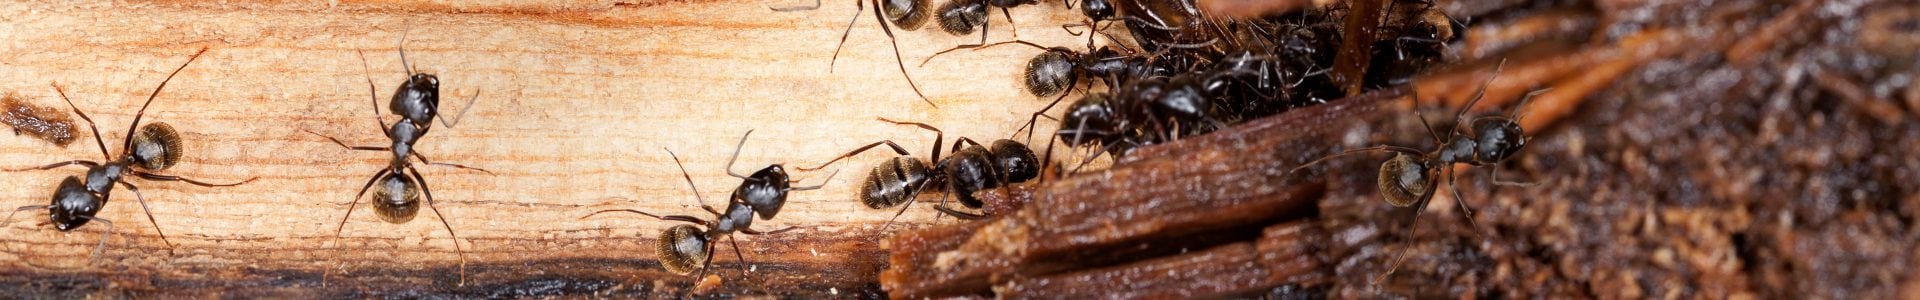 How Do I Protect My Home from Termites?